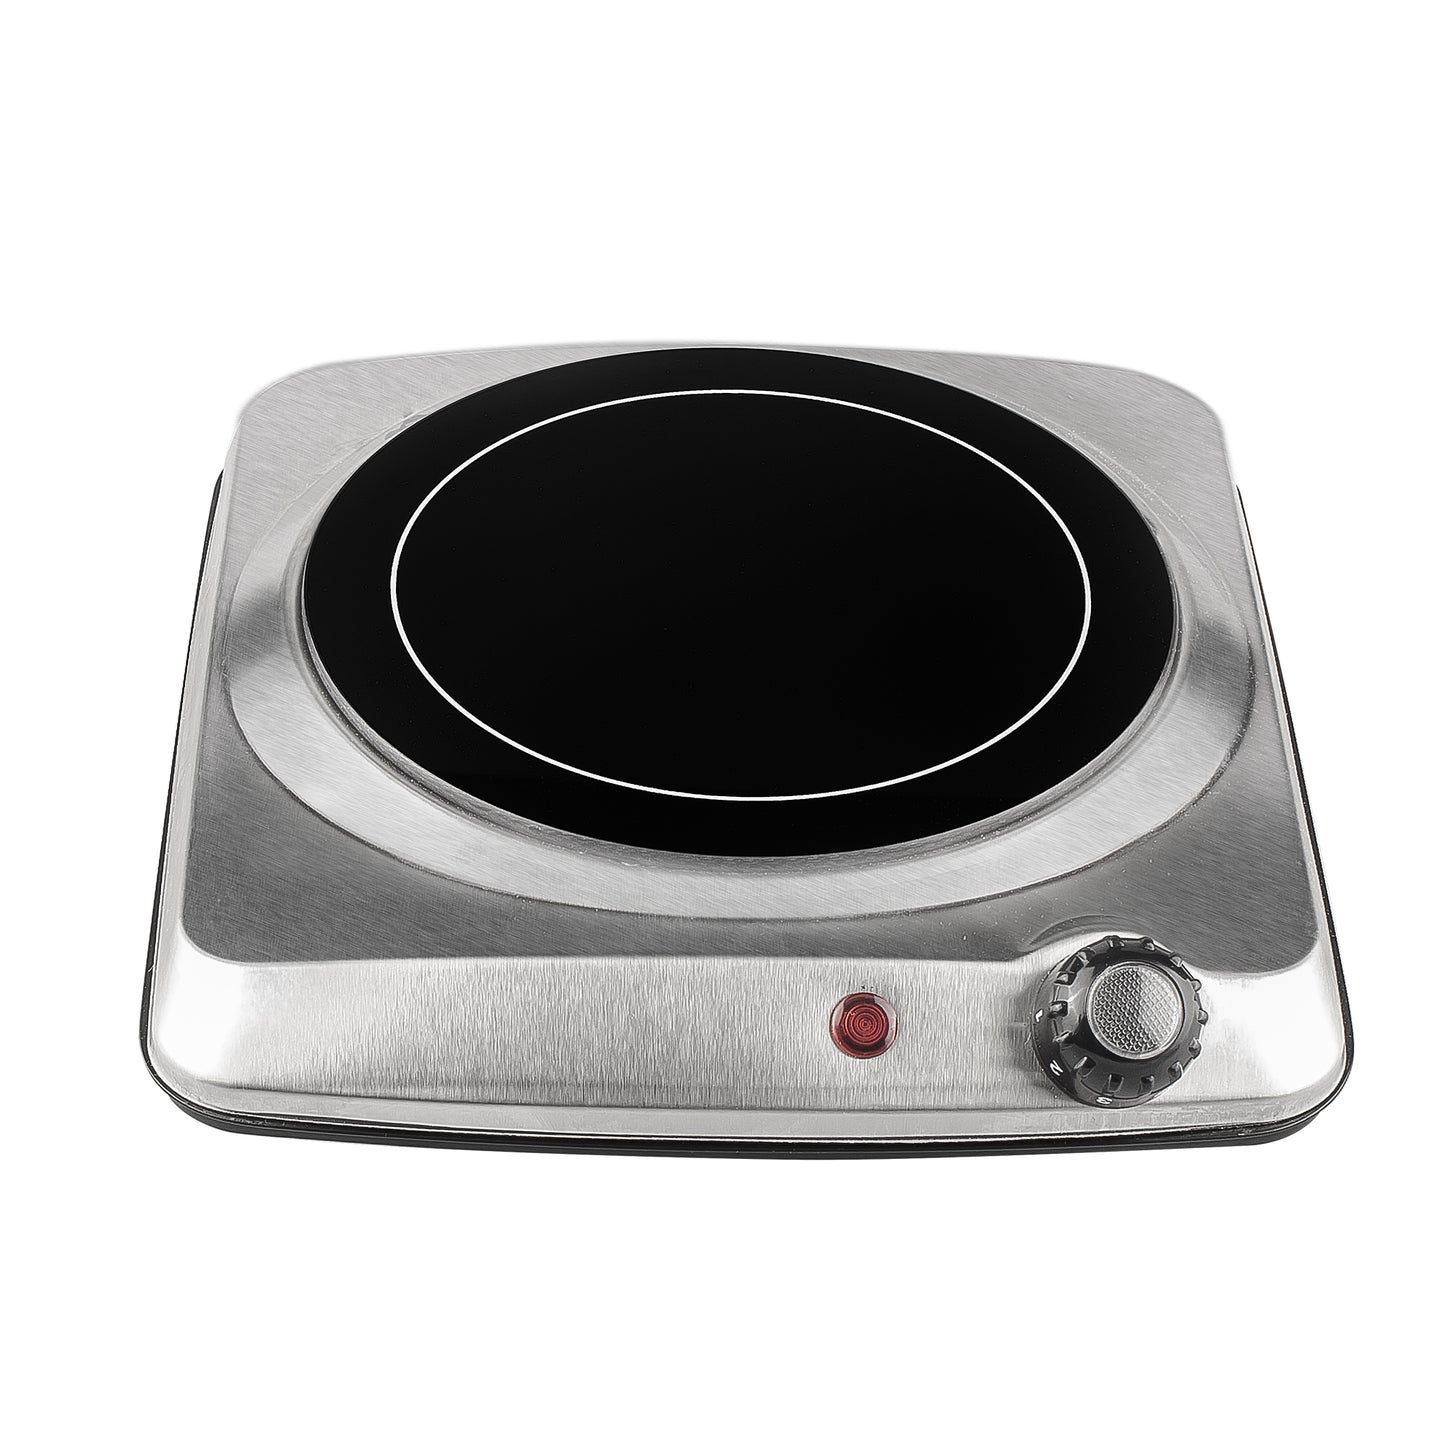 VITRO STAINLESS STEEL ELECTRIC STOVE 1 PLATE 1200W 